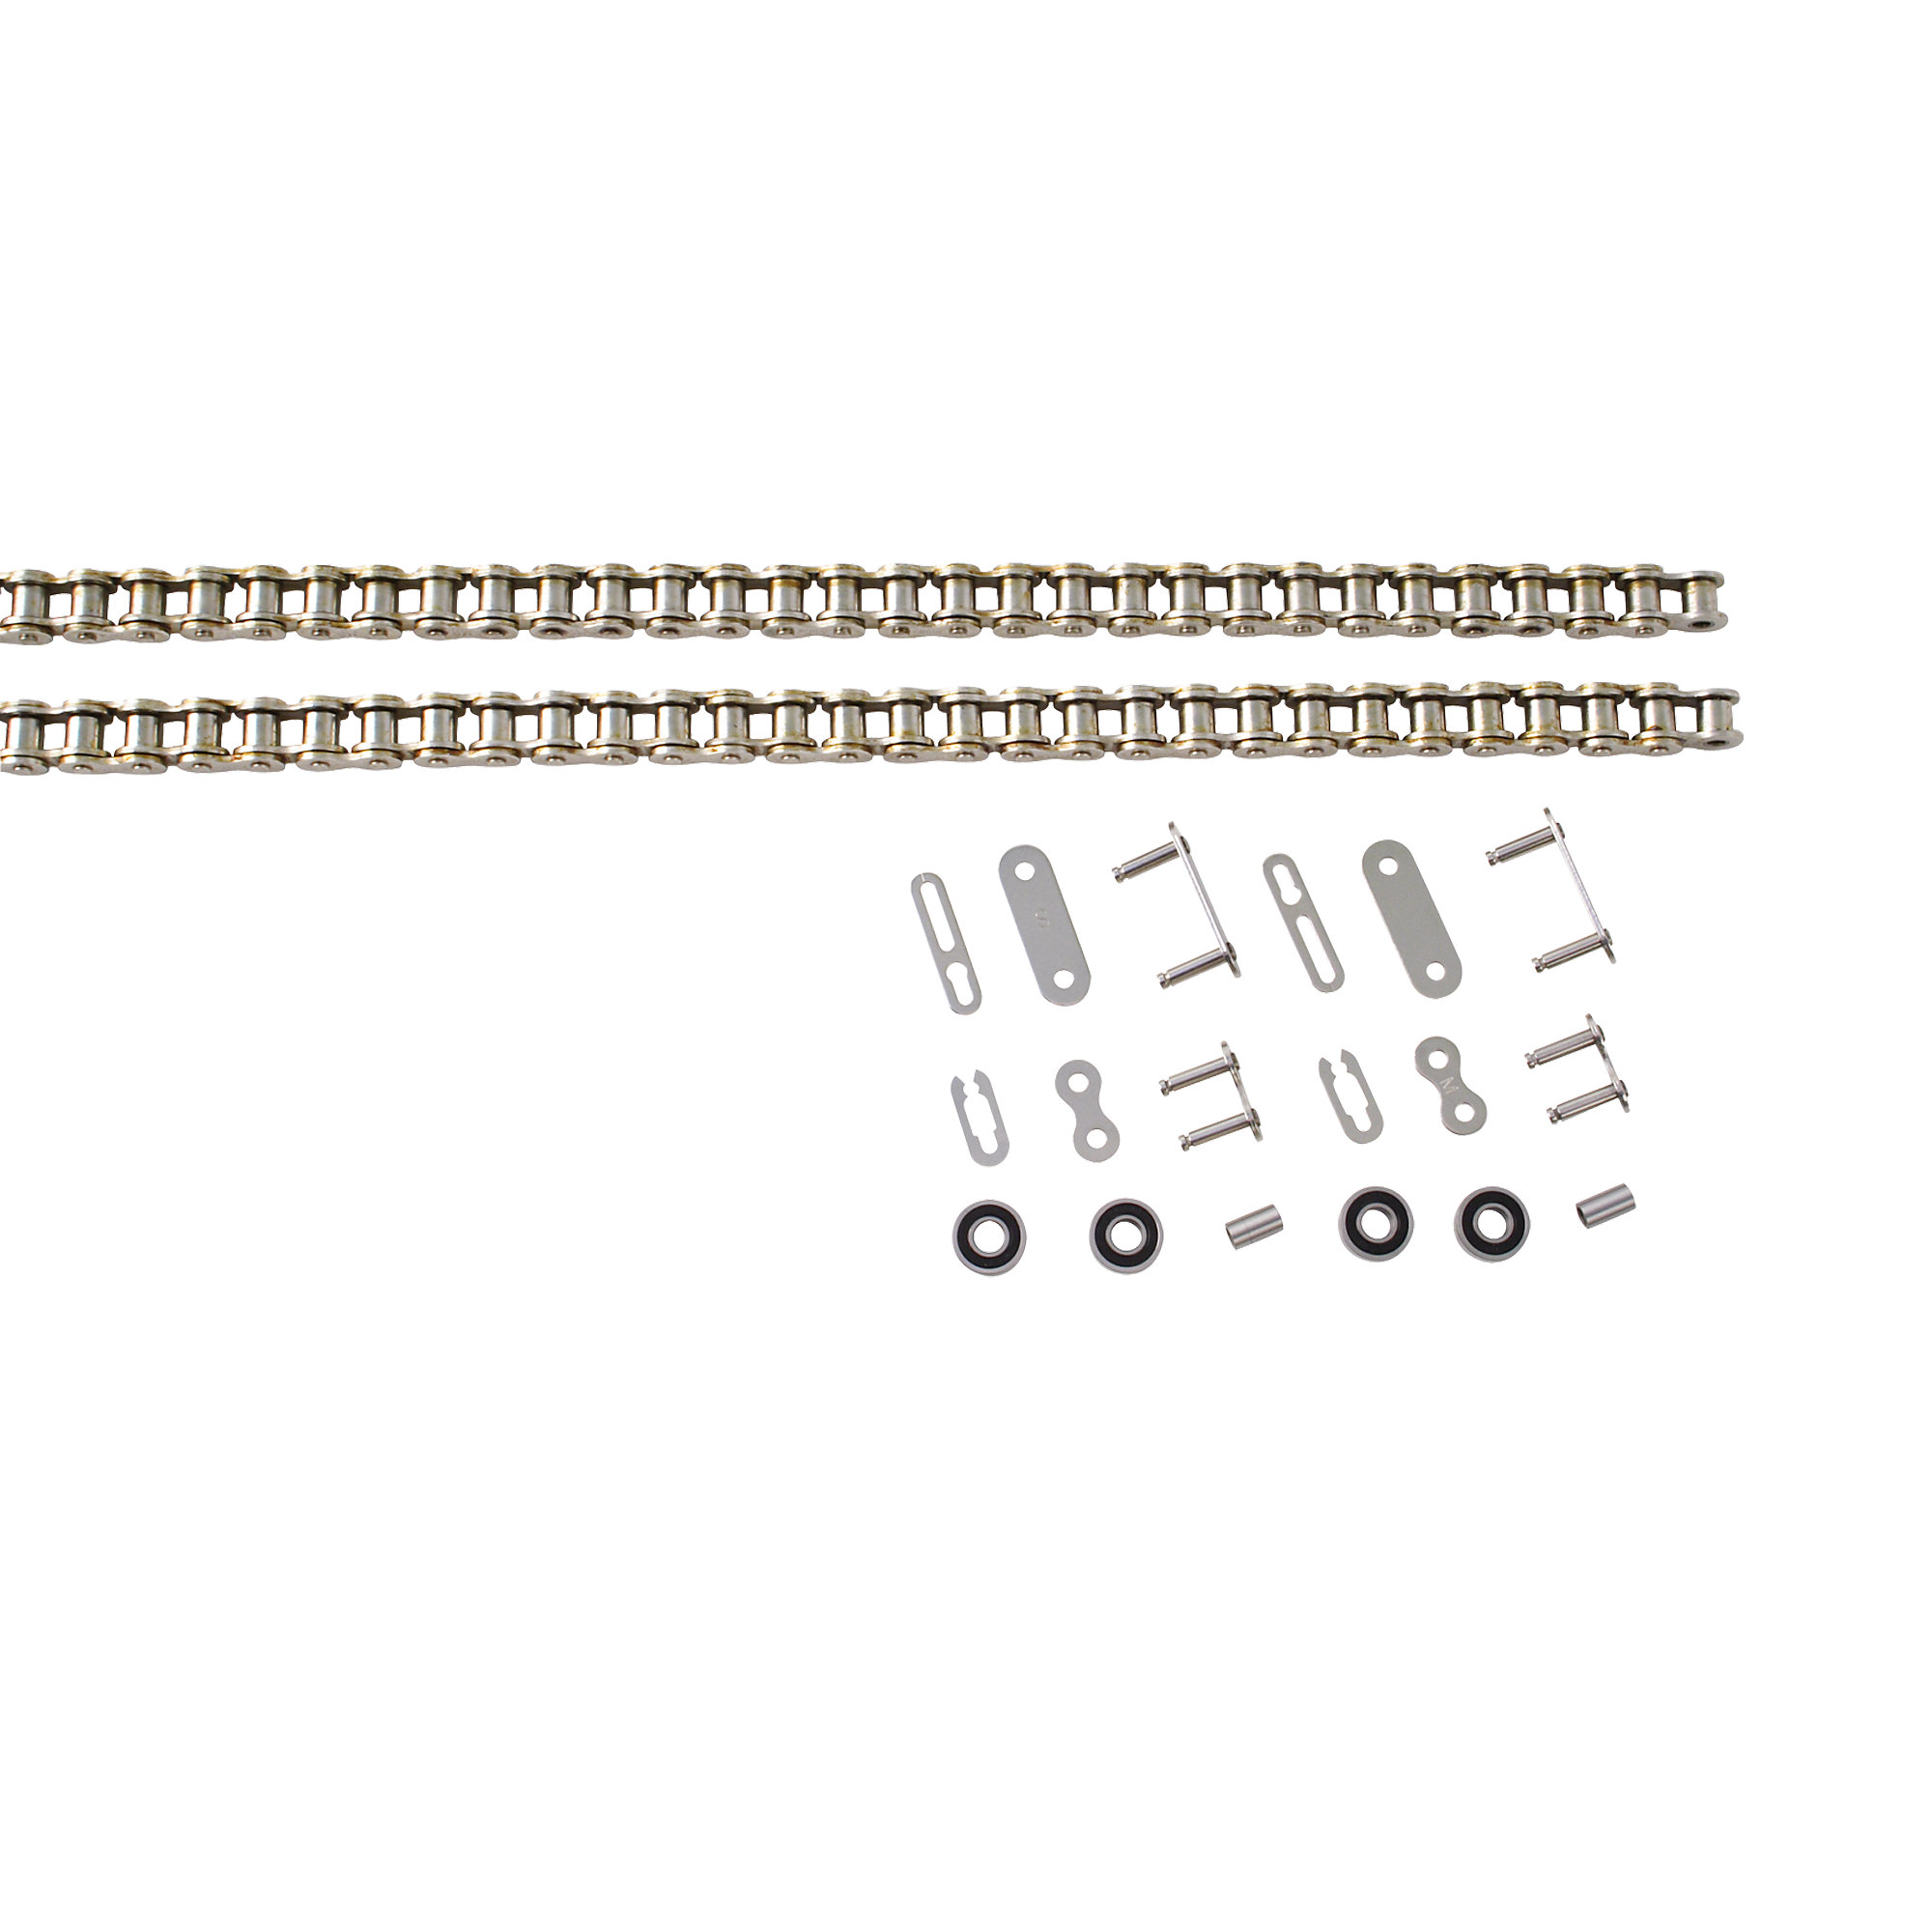 Step Chain Parts Kit, Stairmaster